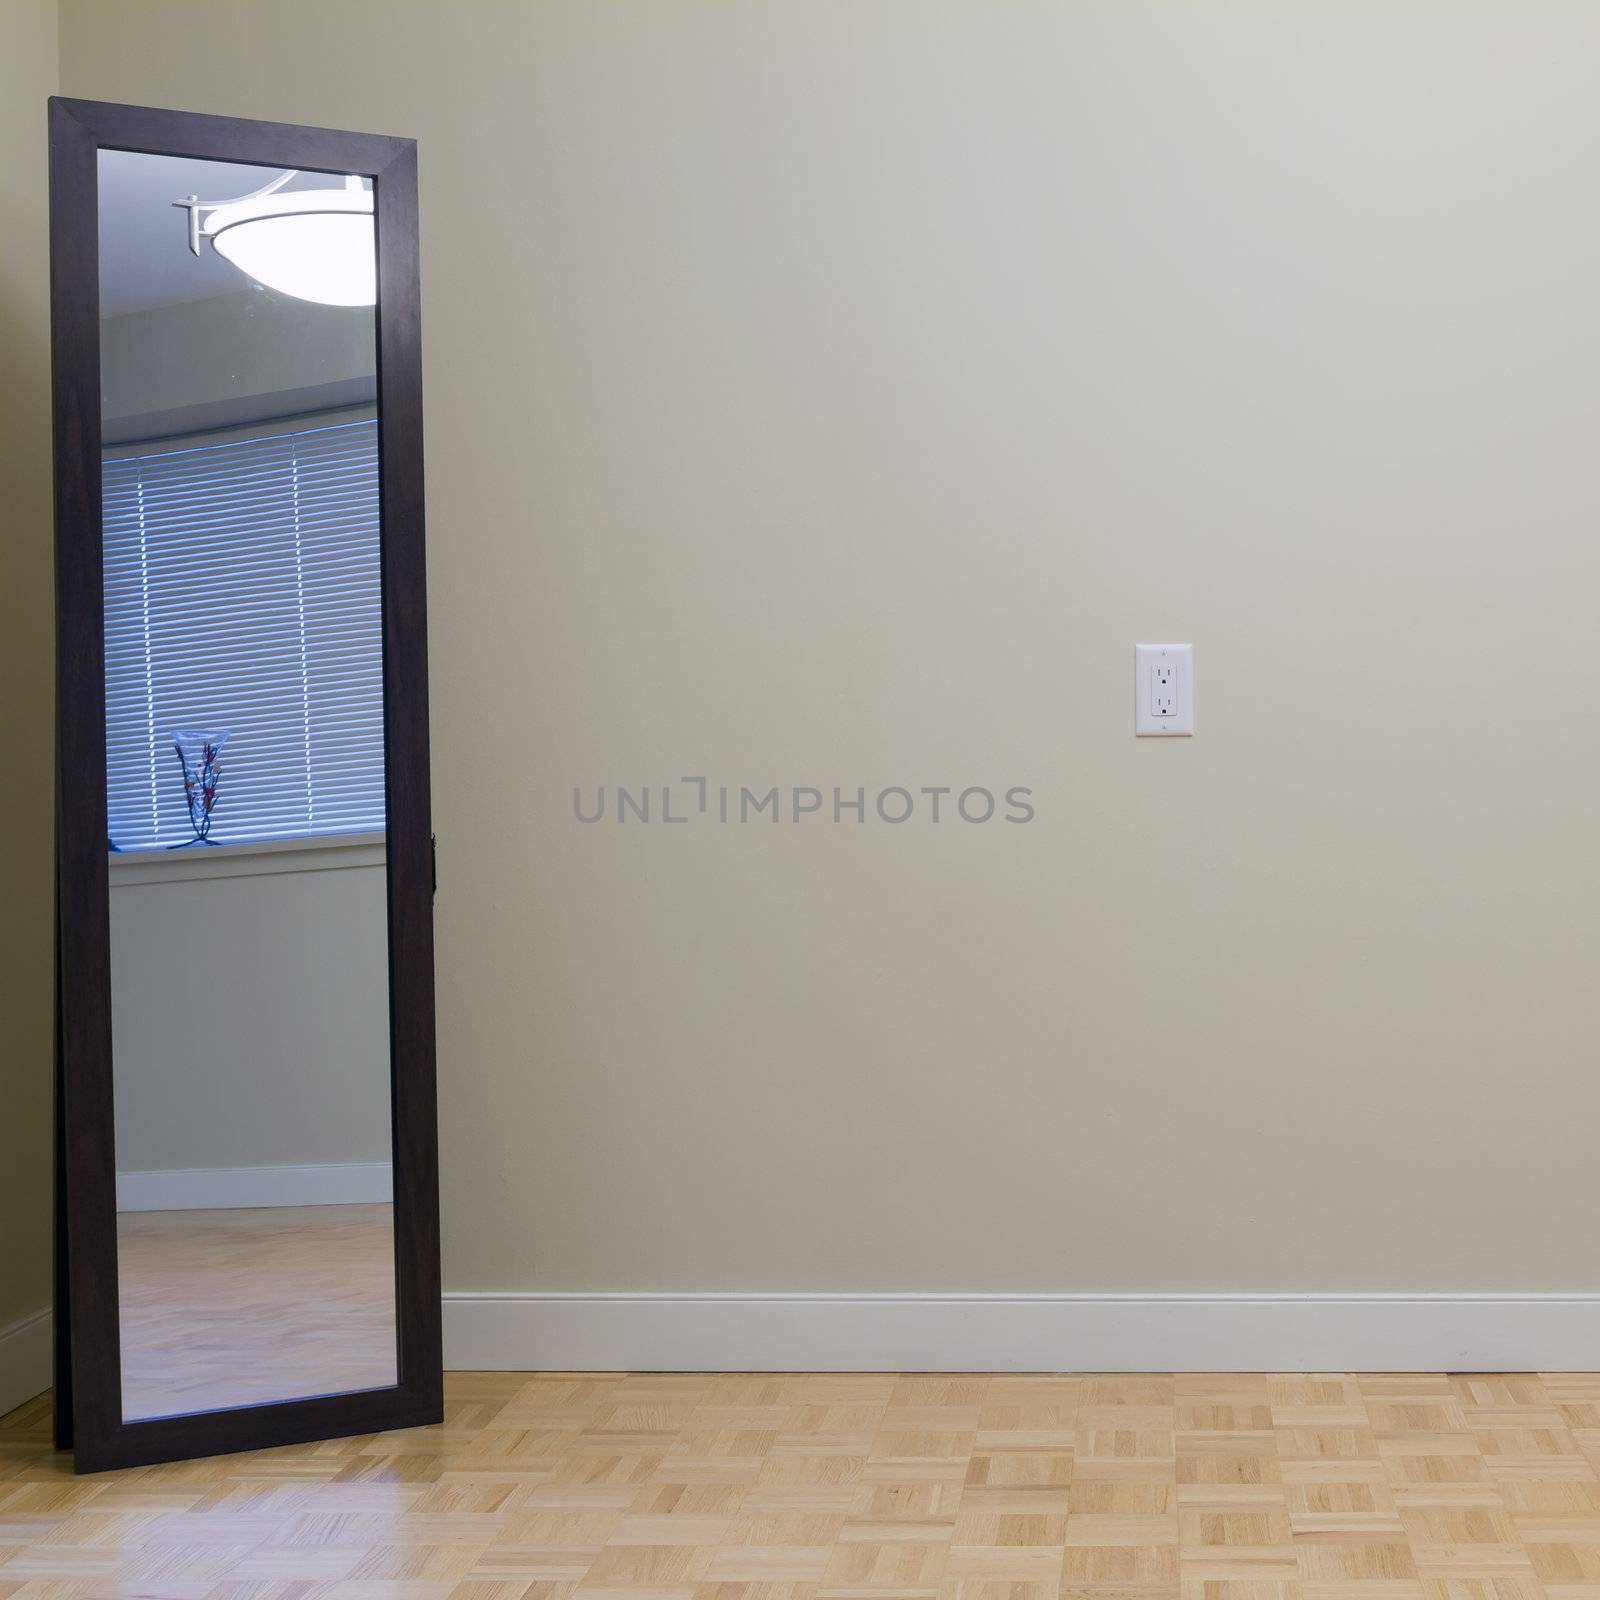 Empty Living Room with mirror in a new apartment